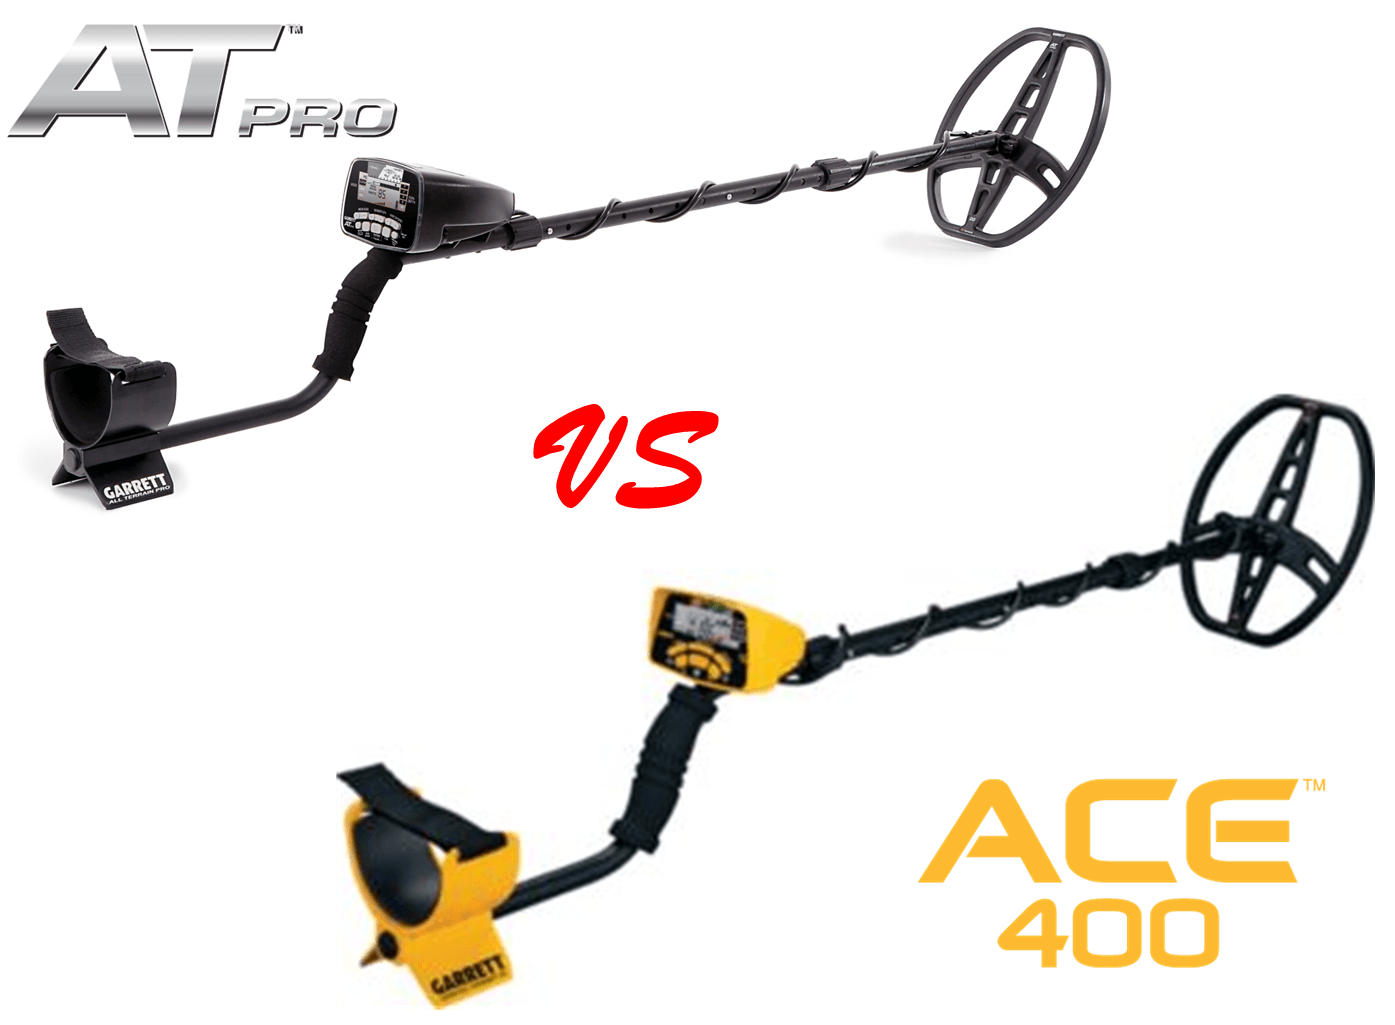 What is The Difference Between the Garrett AT Pro and ACE 400 Metal Detectors?